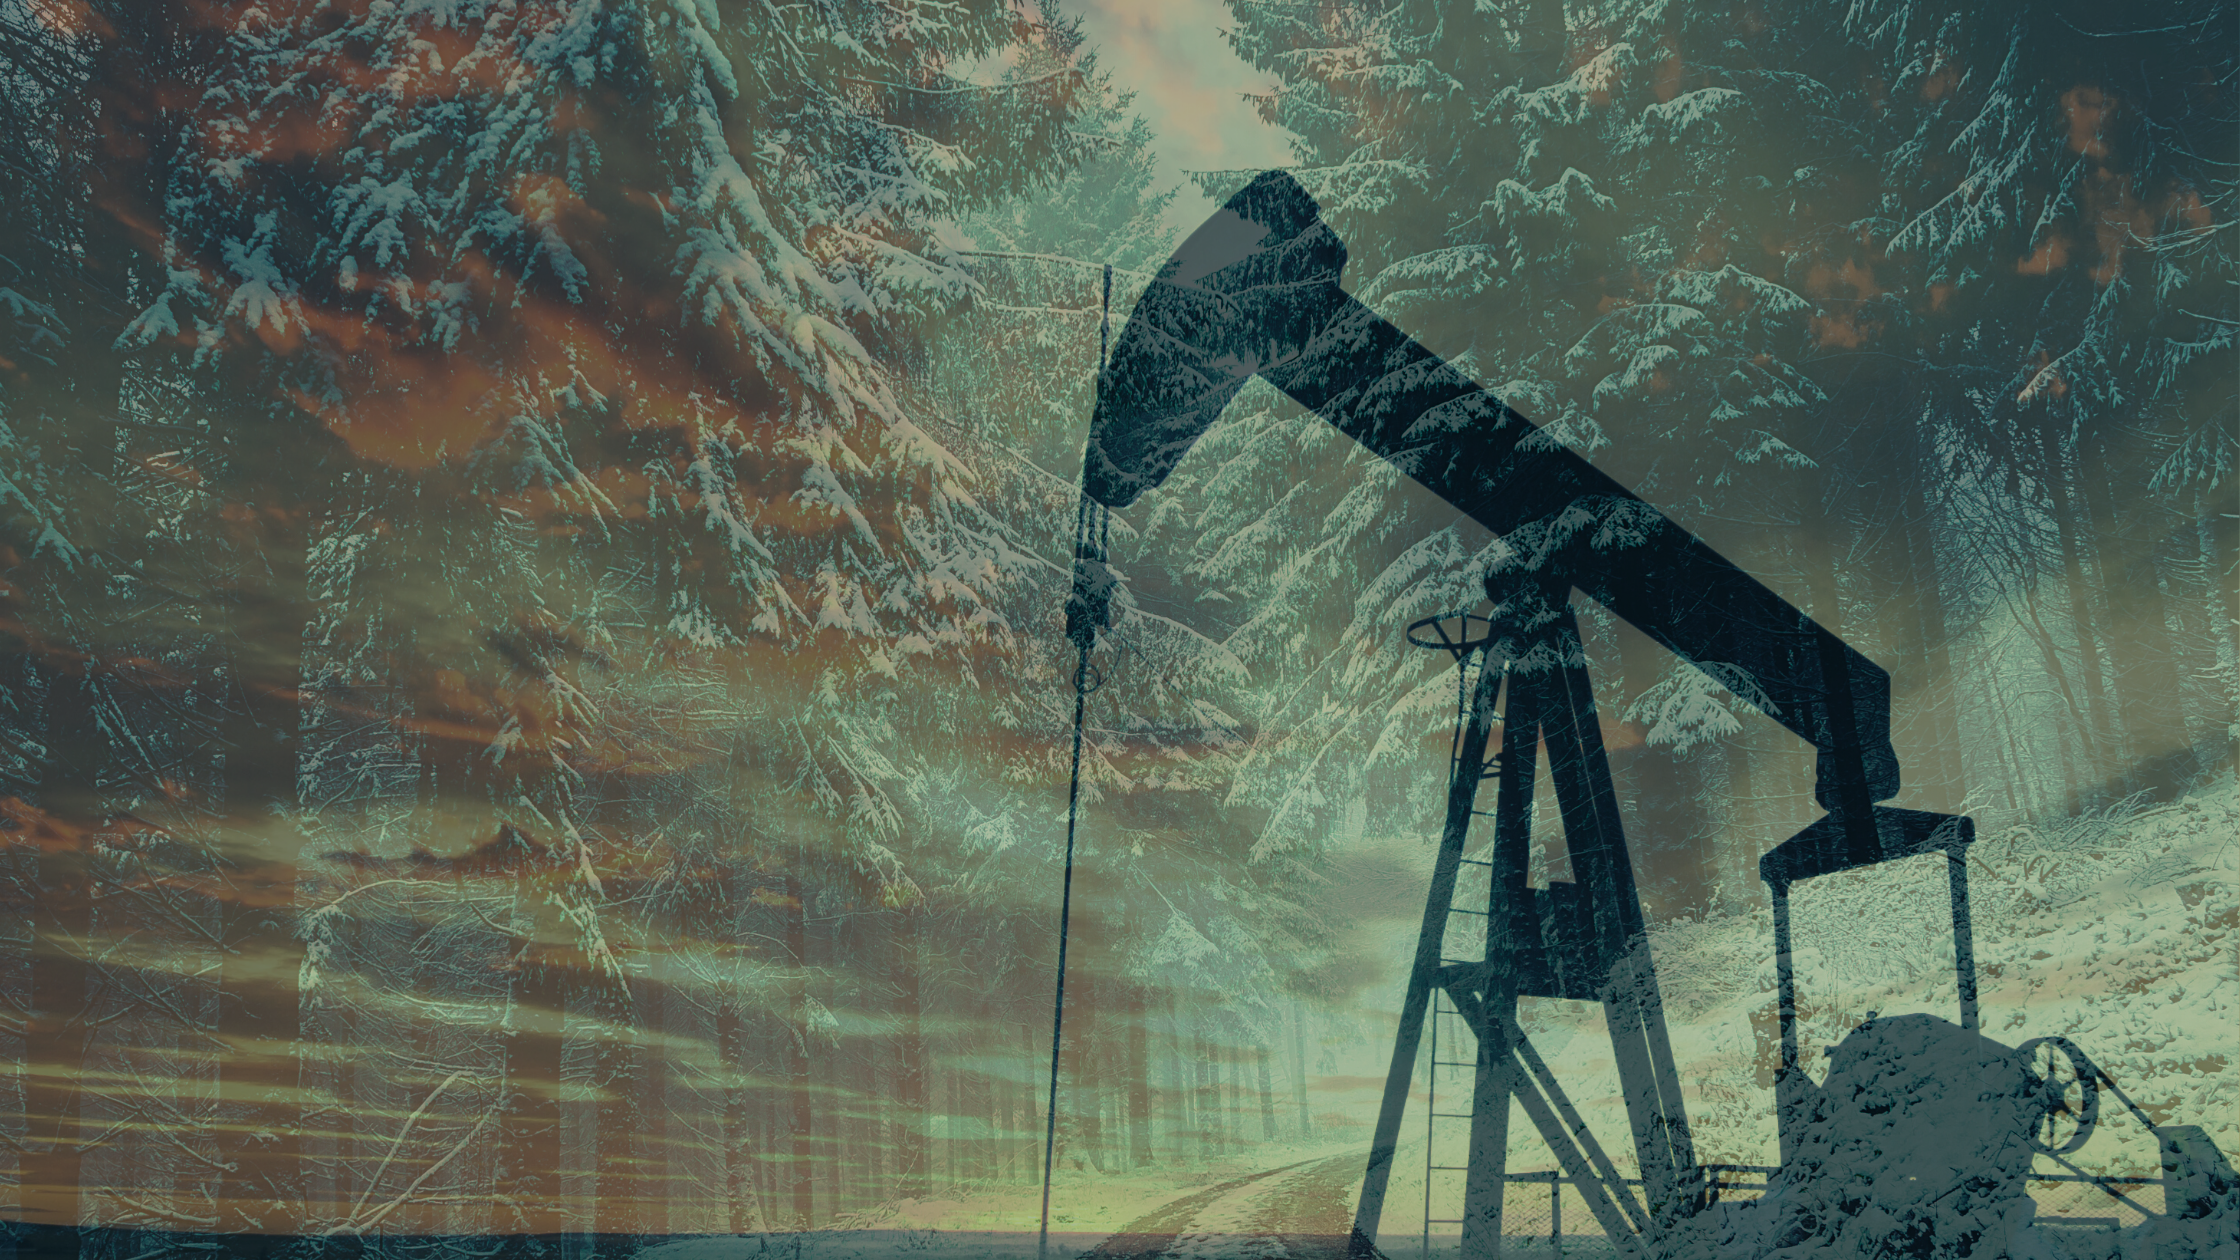 Double Exposure Image with oil rig and pine trees